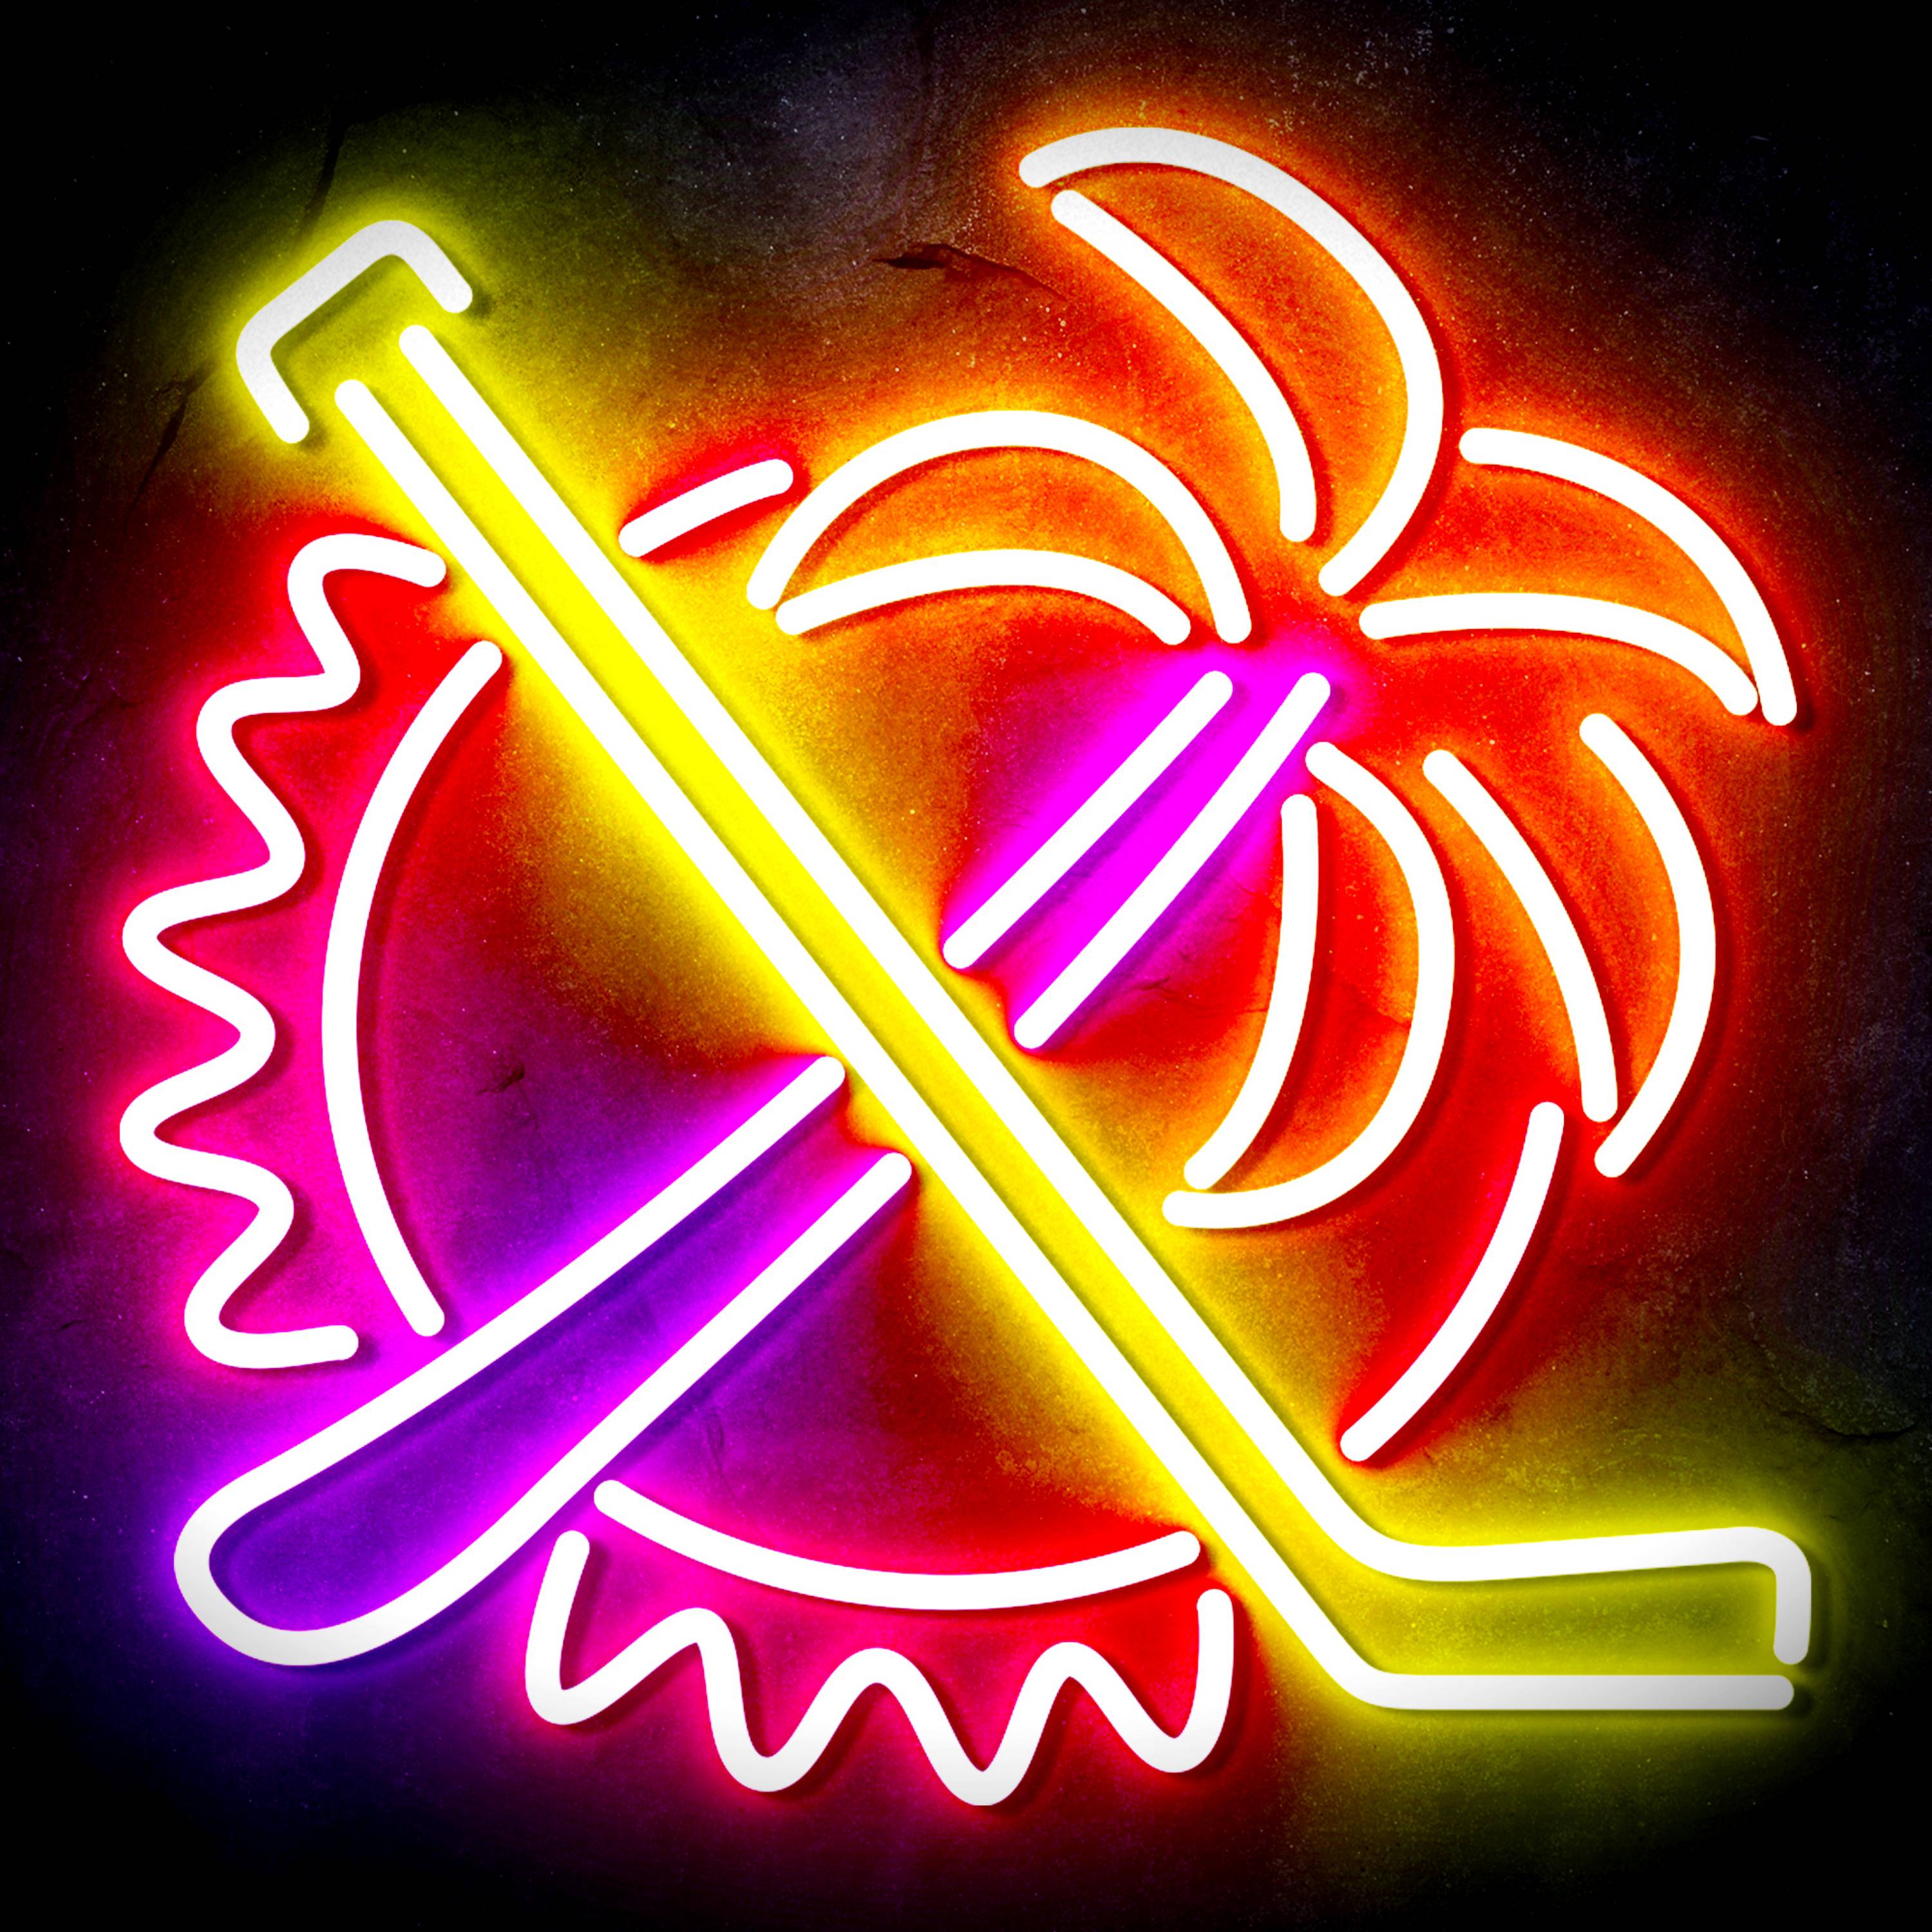 NHL Florida Panthers LED Neon Sign